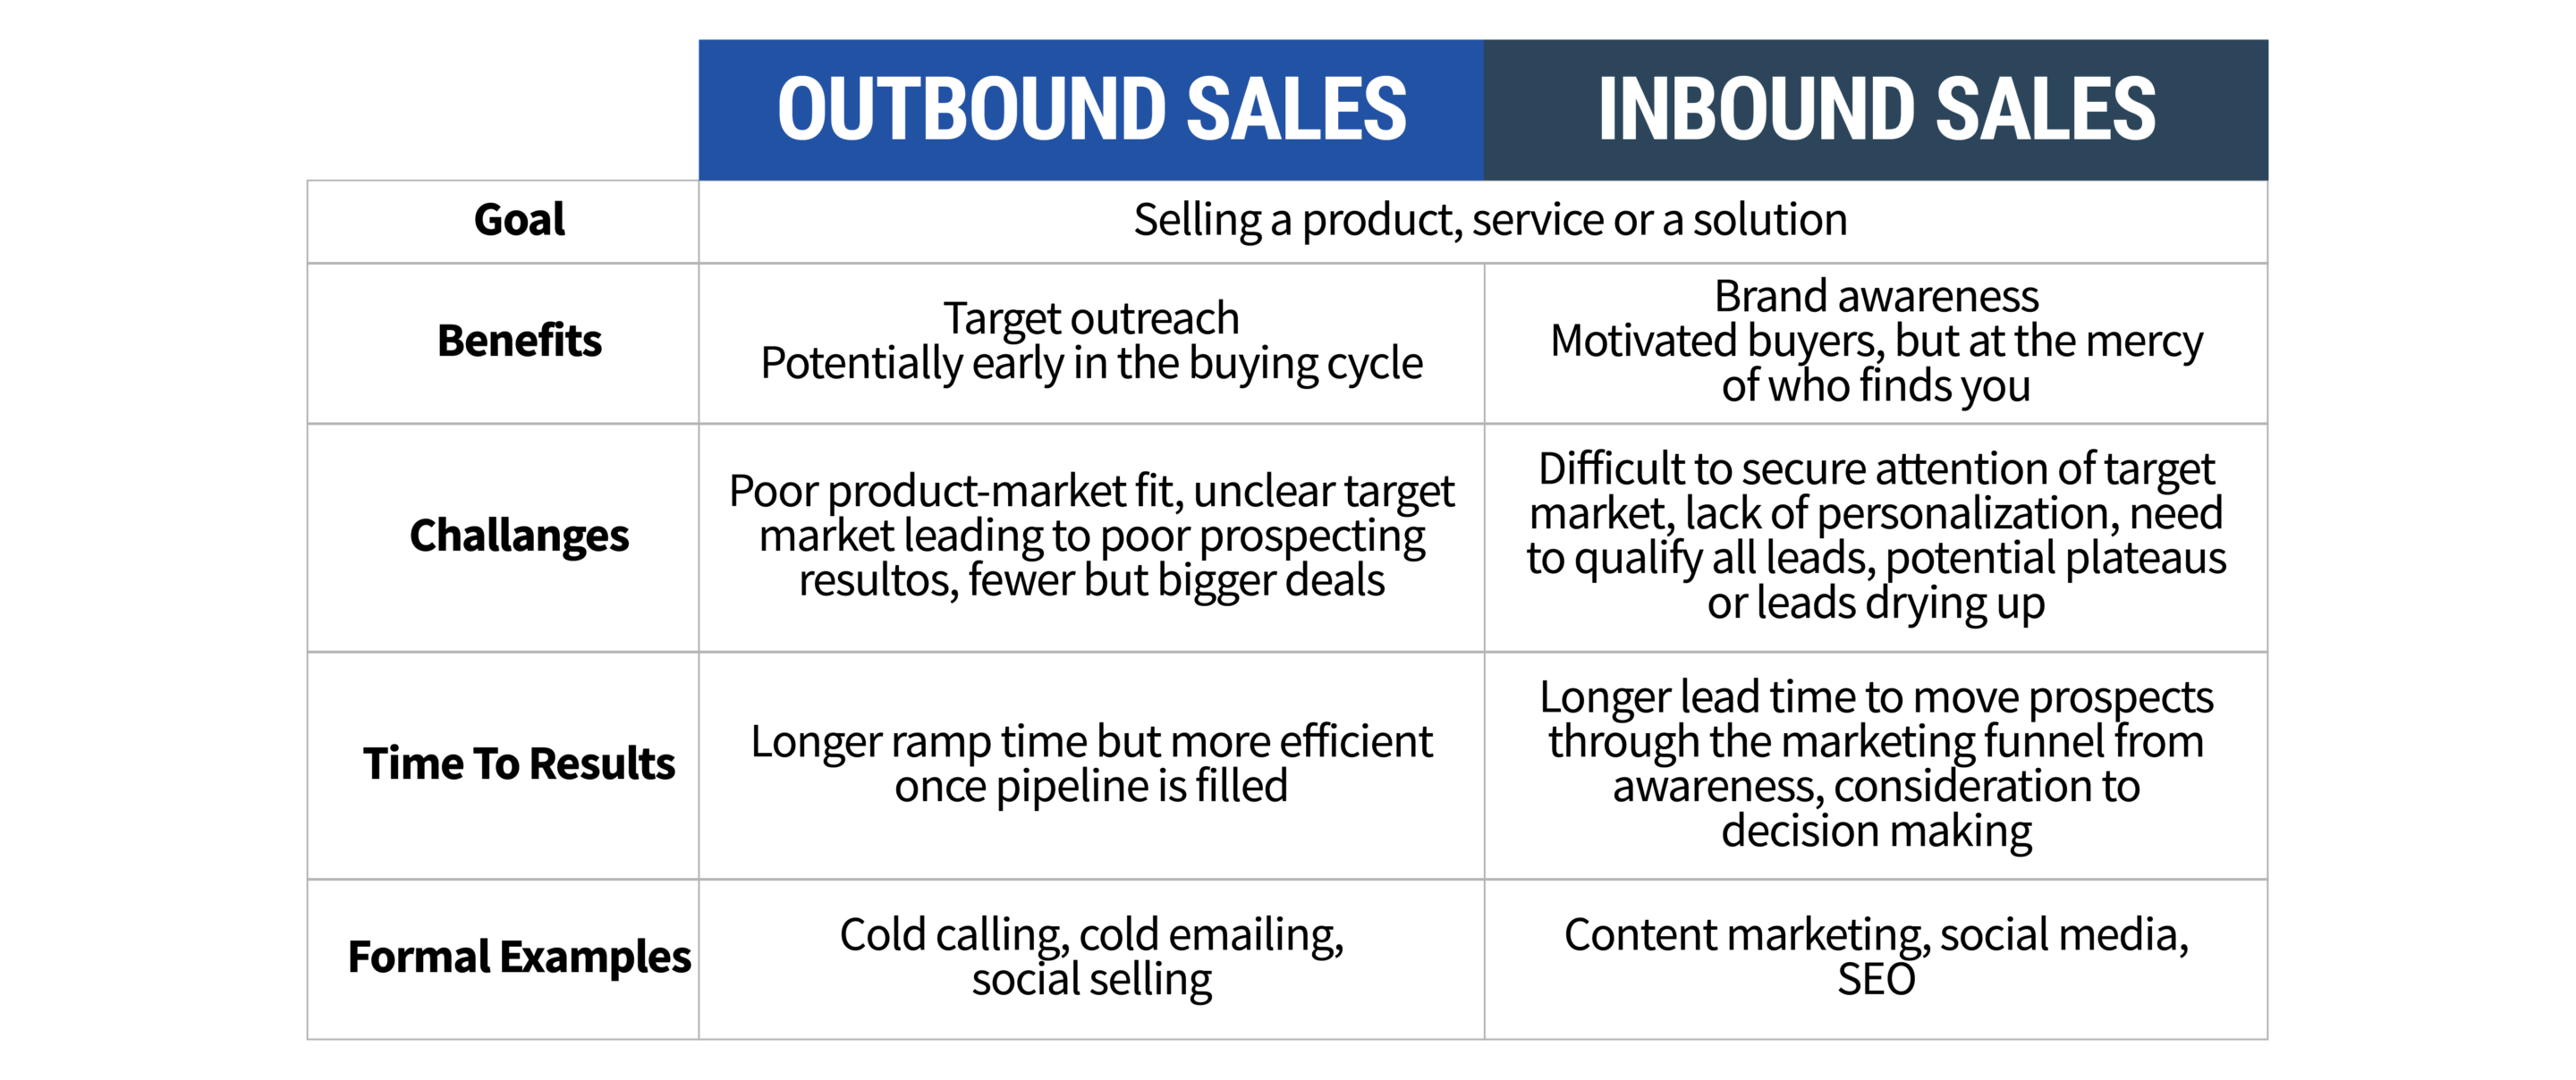 The Predictable Revenue Guide to Outbound Sales